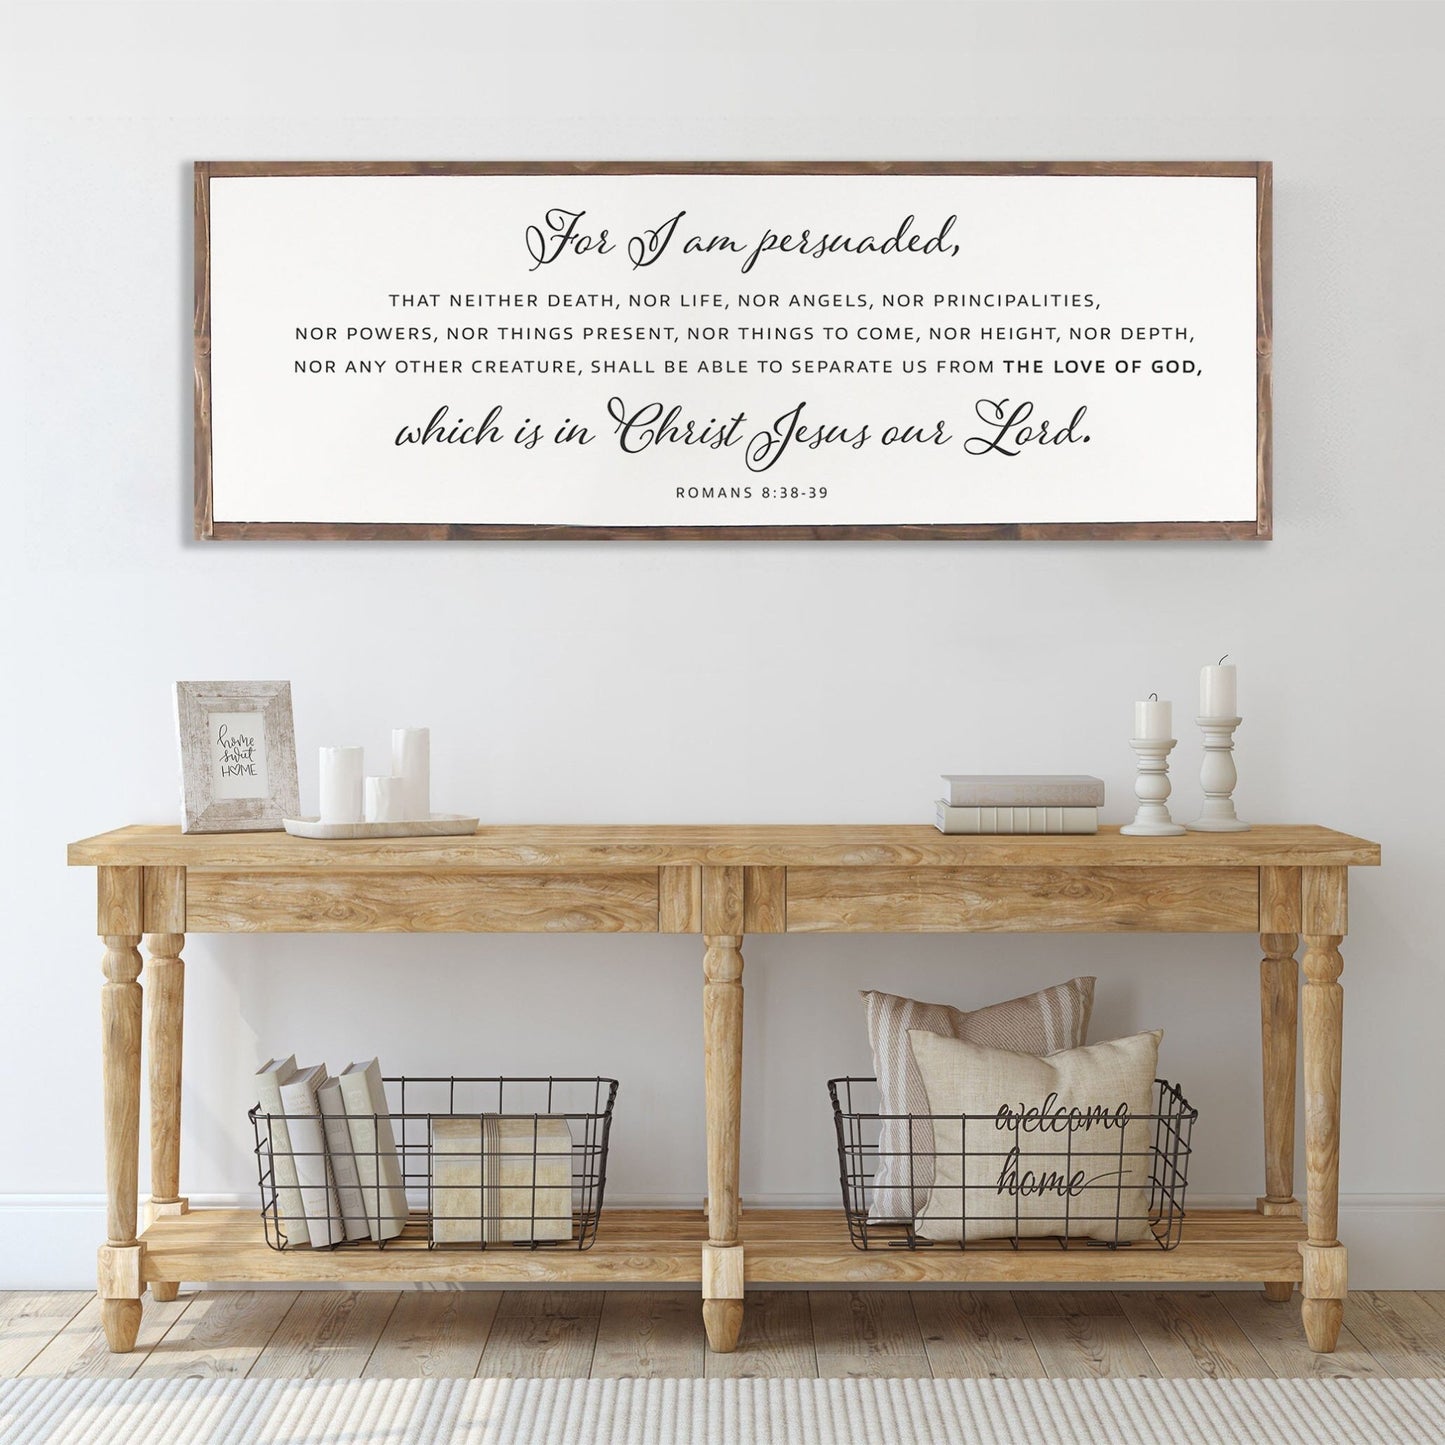 For I Am Persuaded | Scripture Rustic Wood Sign | Christian Wall Décor | Romans 8:38-39 Scripture Wood Sign Rustic Wood Sign - Forever Written